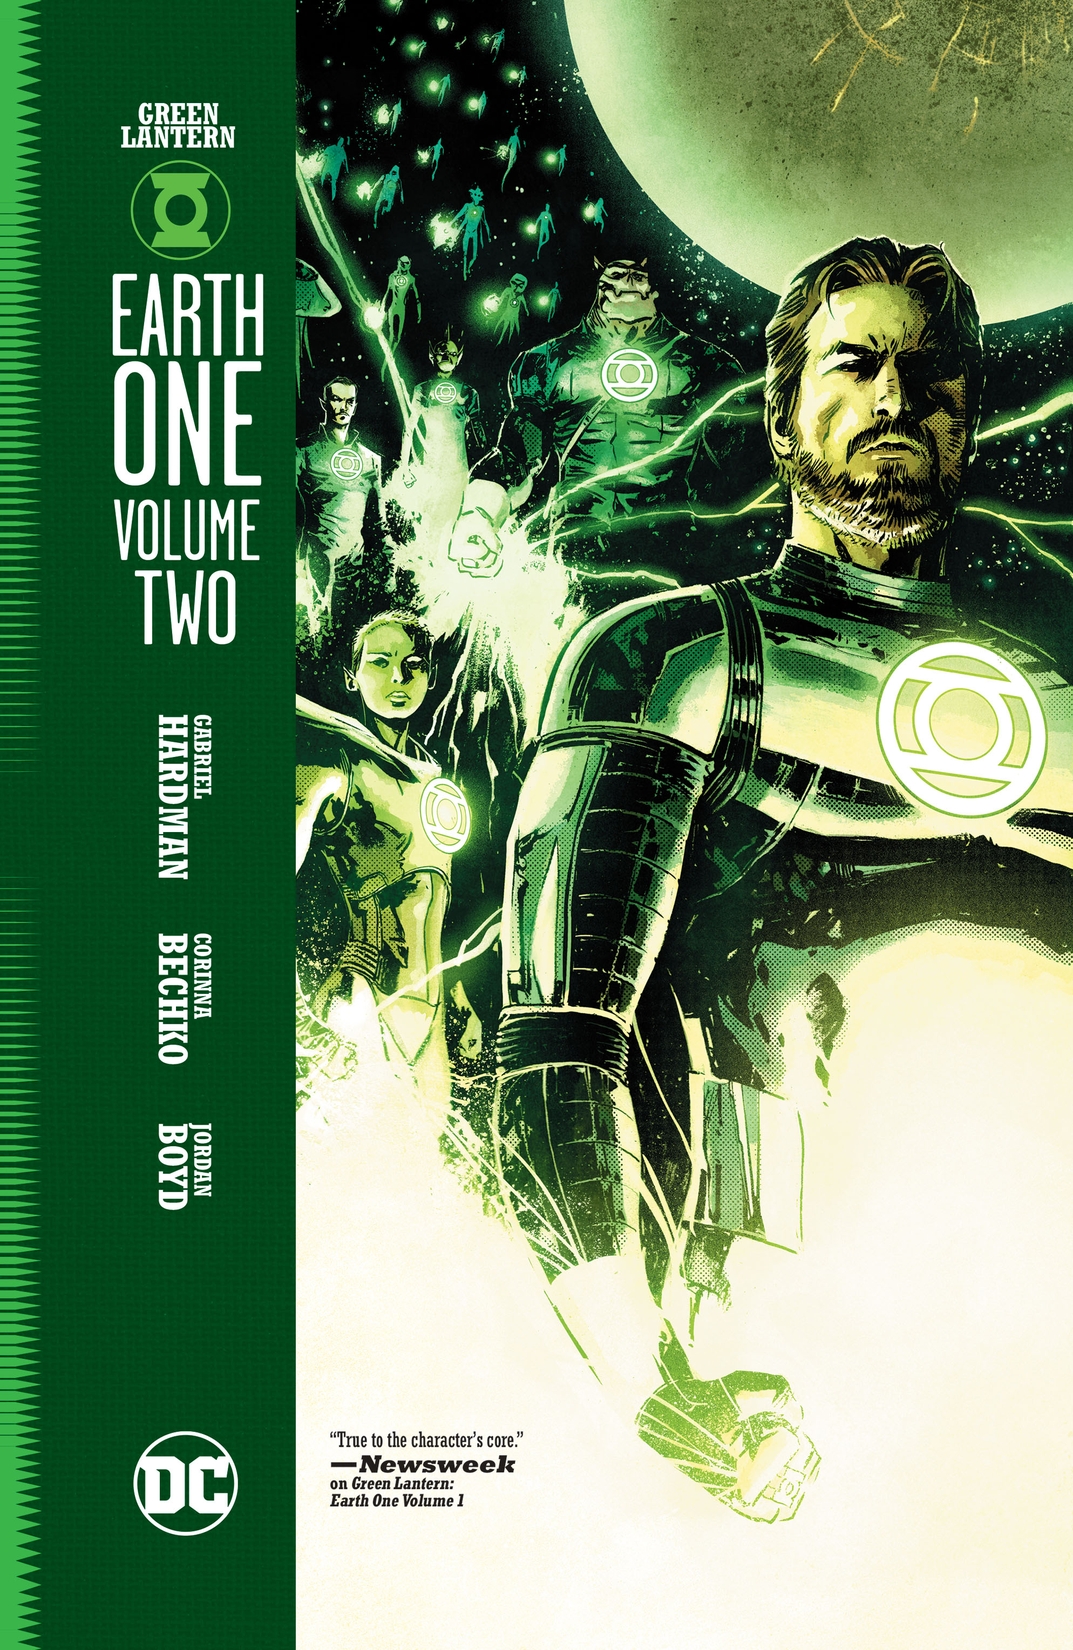 Green Lantern: Earth One Vol. 2 preview images